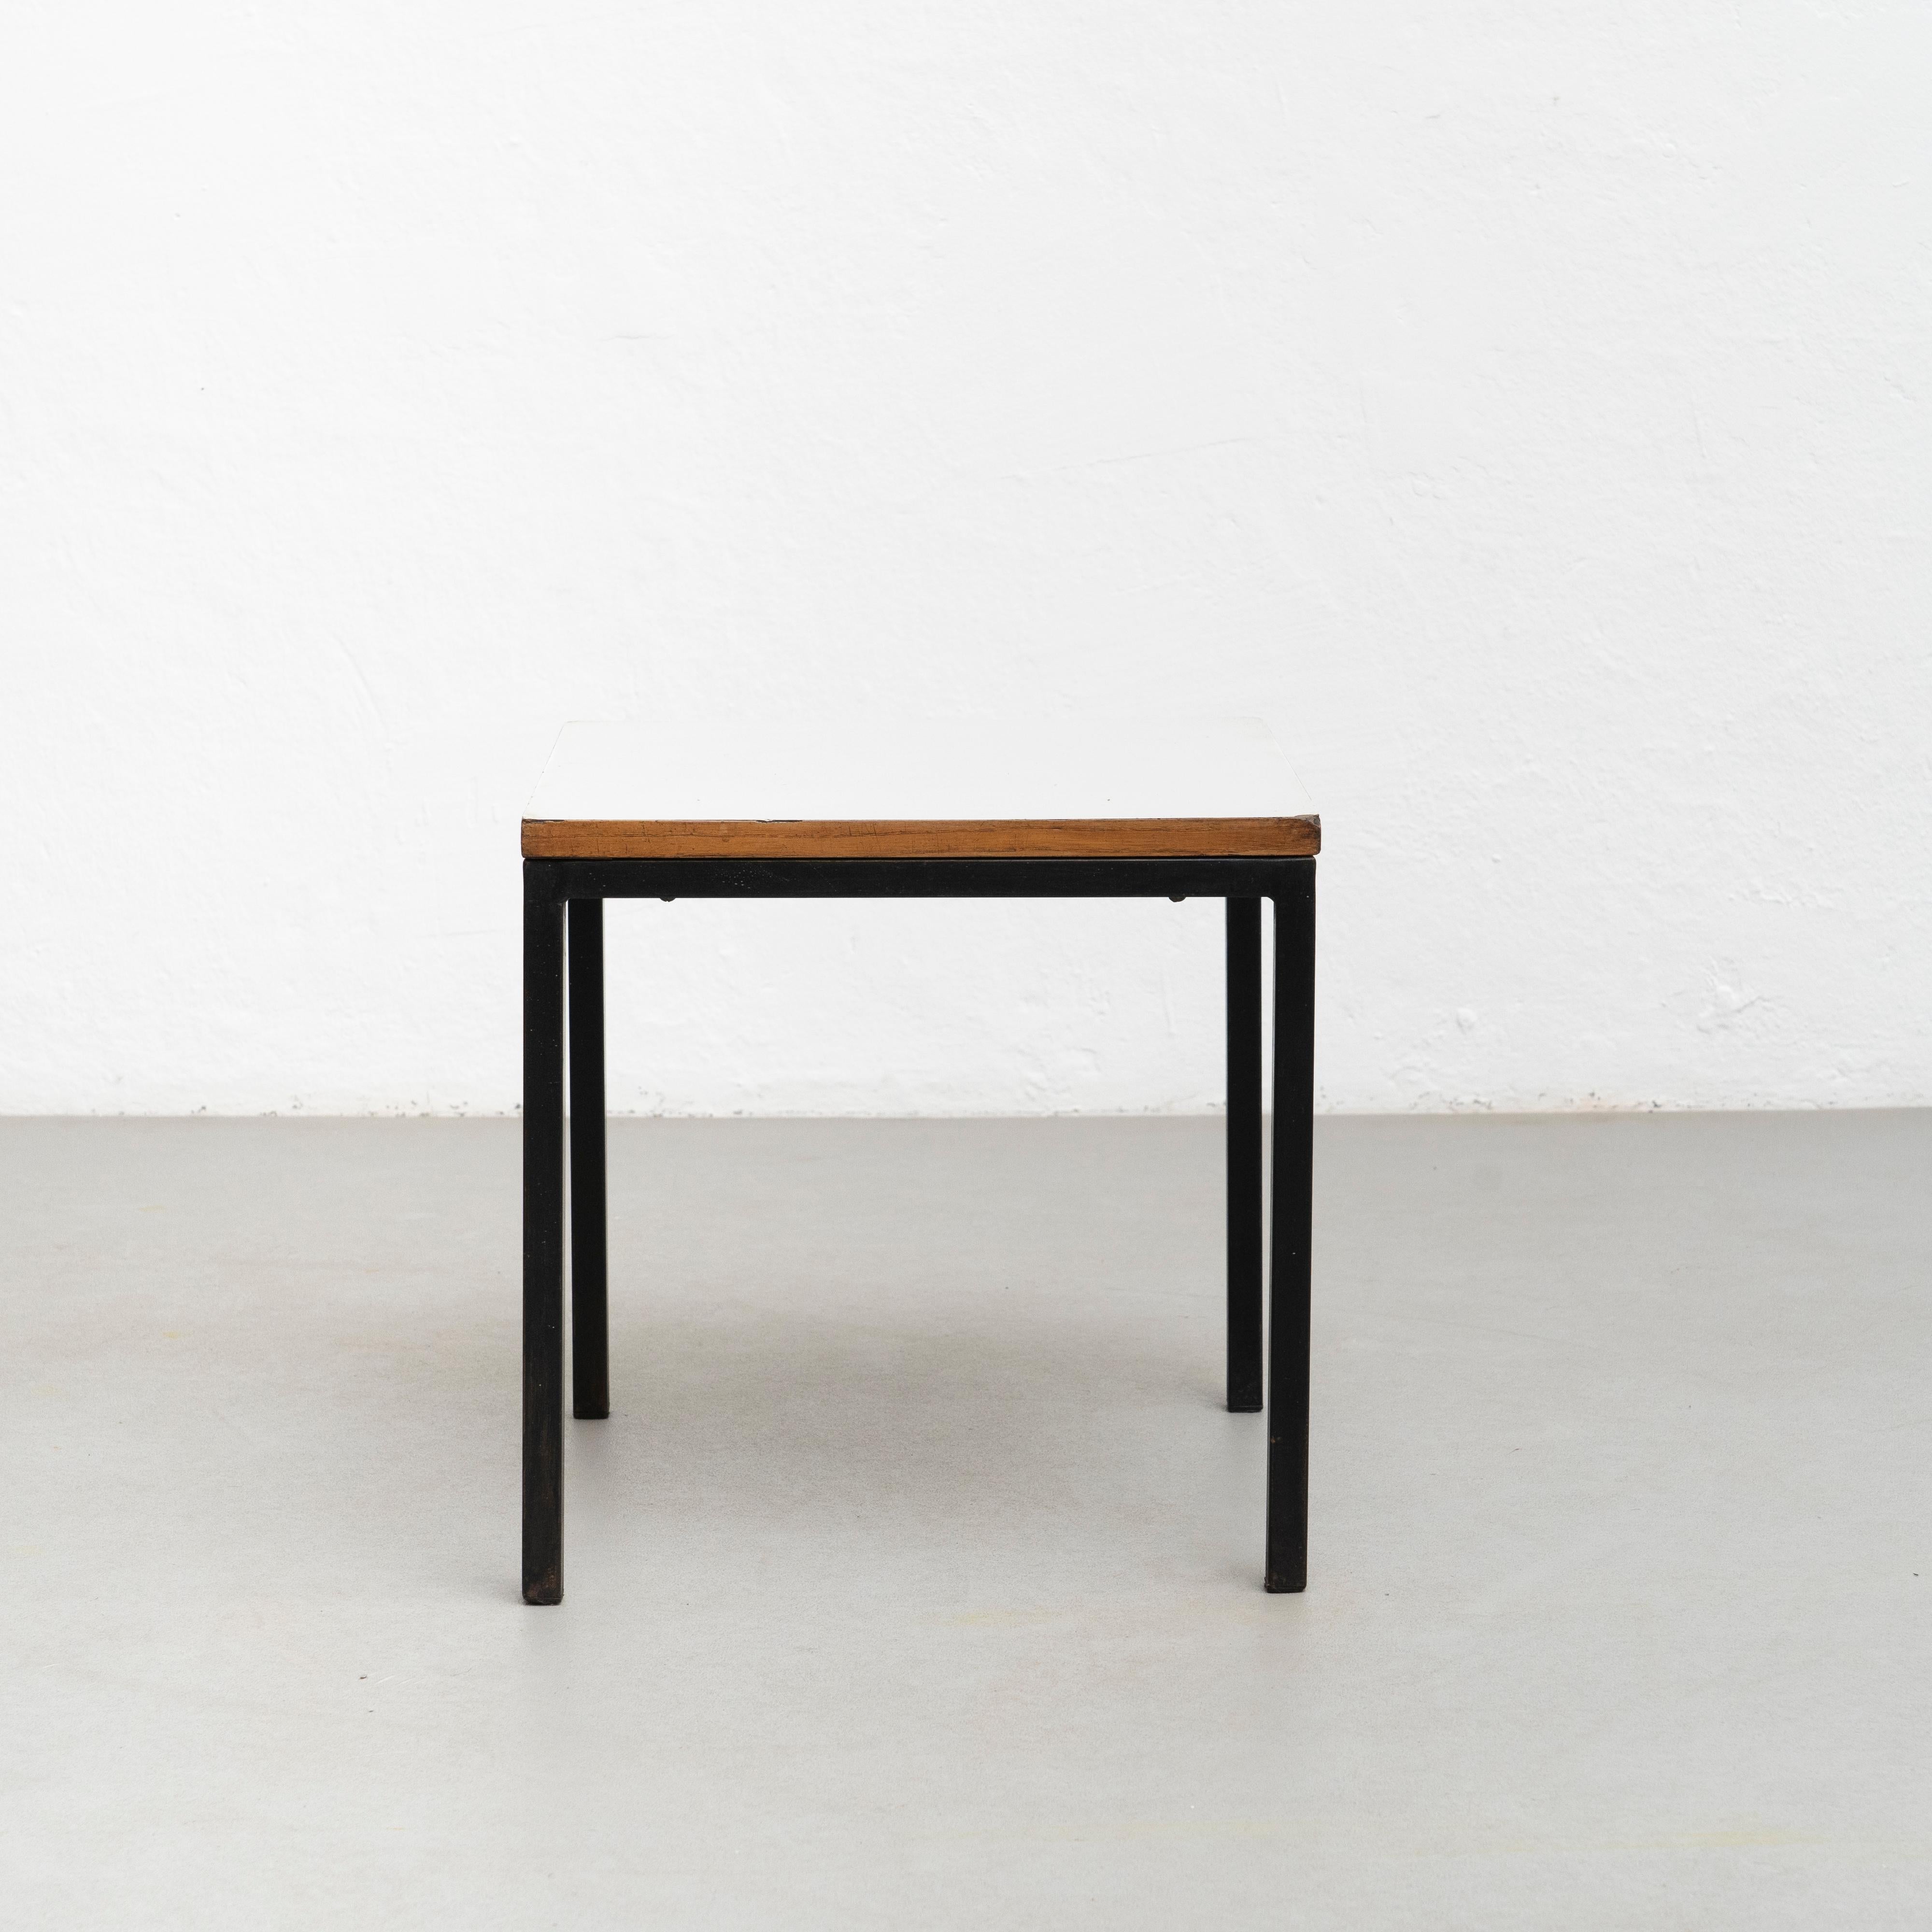 Laminated Charlotte Perriand Metal, Wood and Formica Table for Cansado, circa 1950